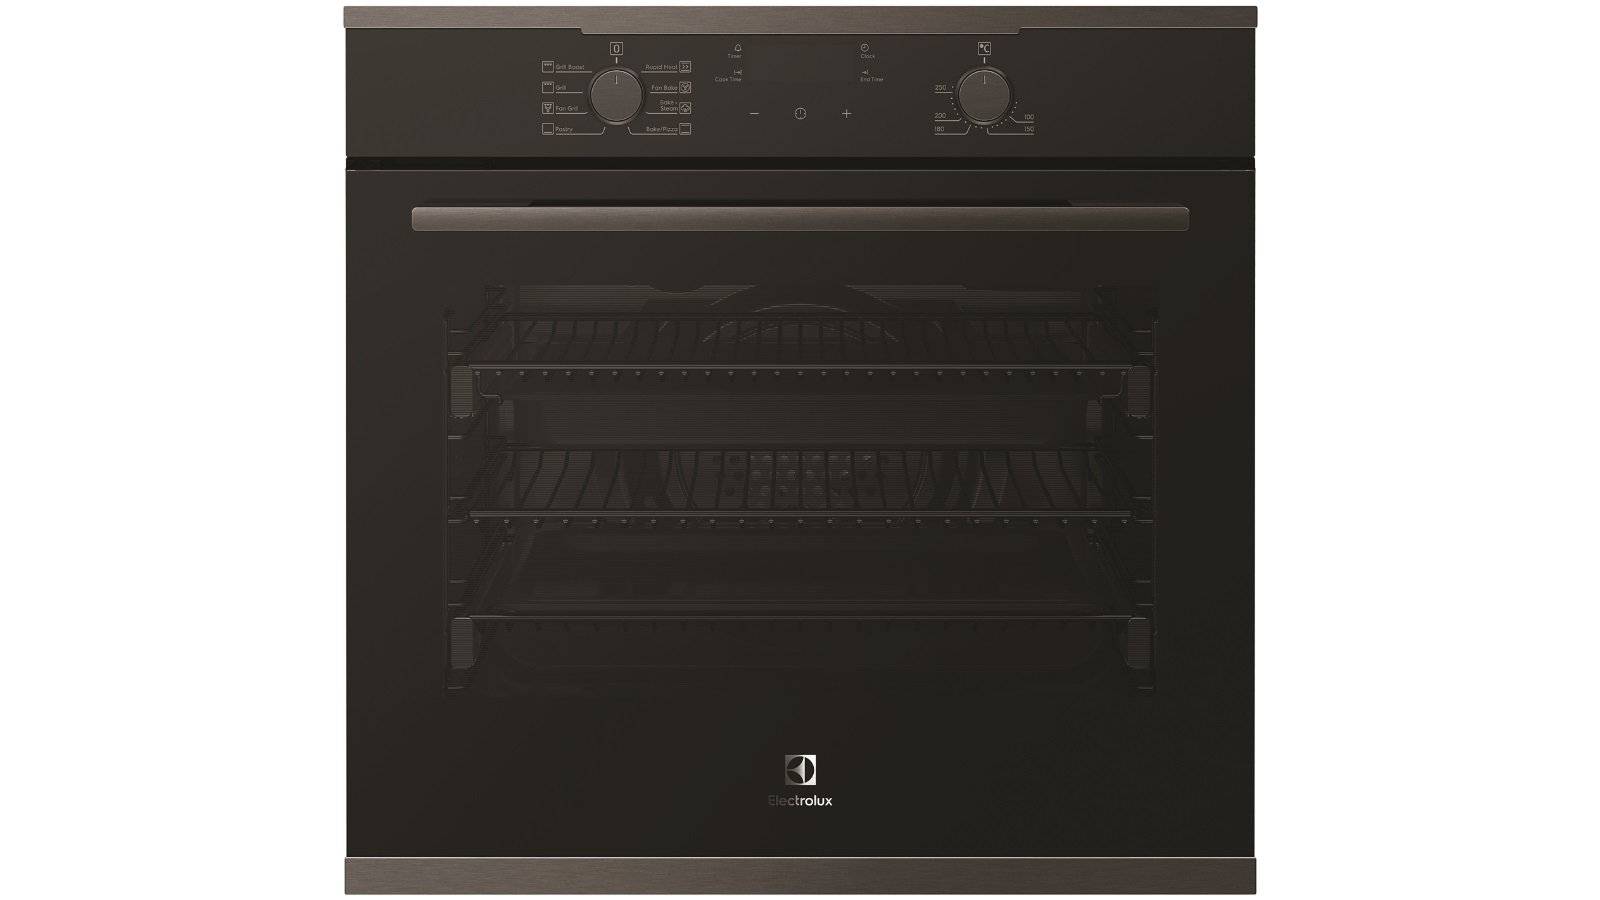 60cm electric oven